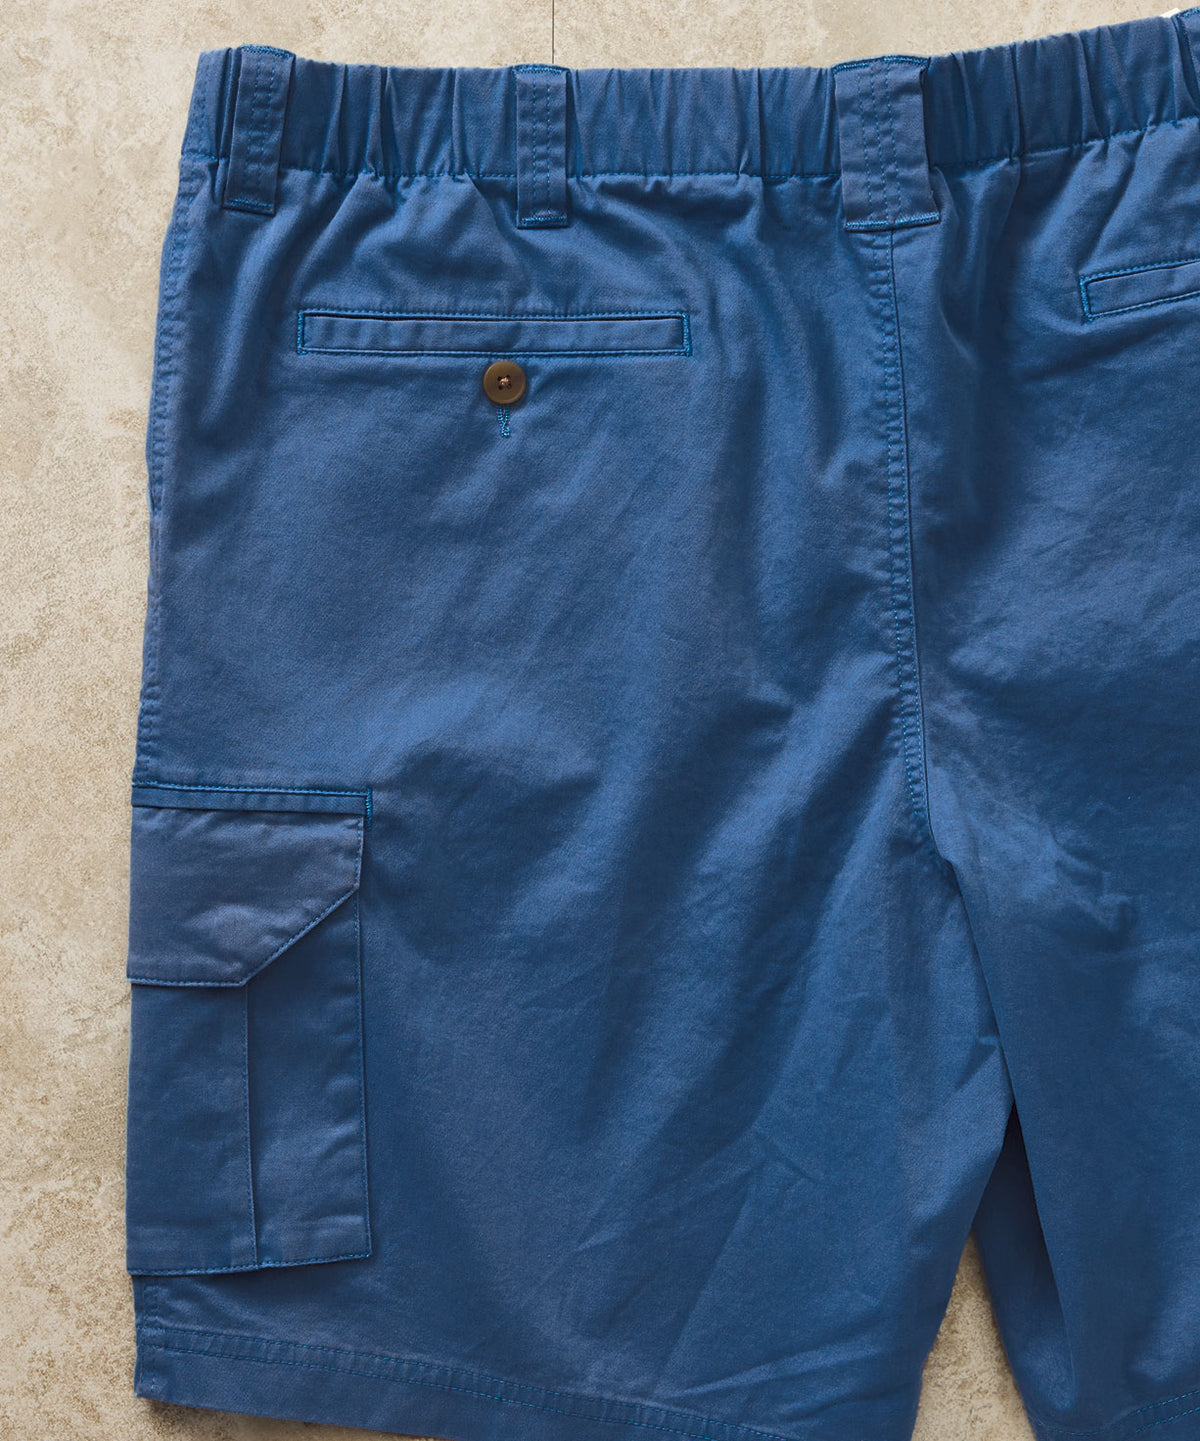 Bright Navy Blue Cotton Stretch Twill Shorts - Made in USA